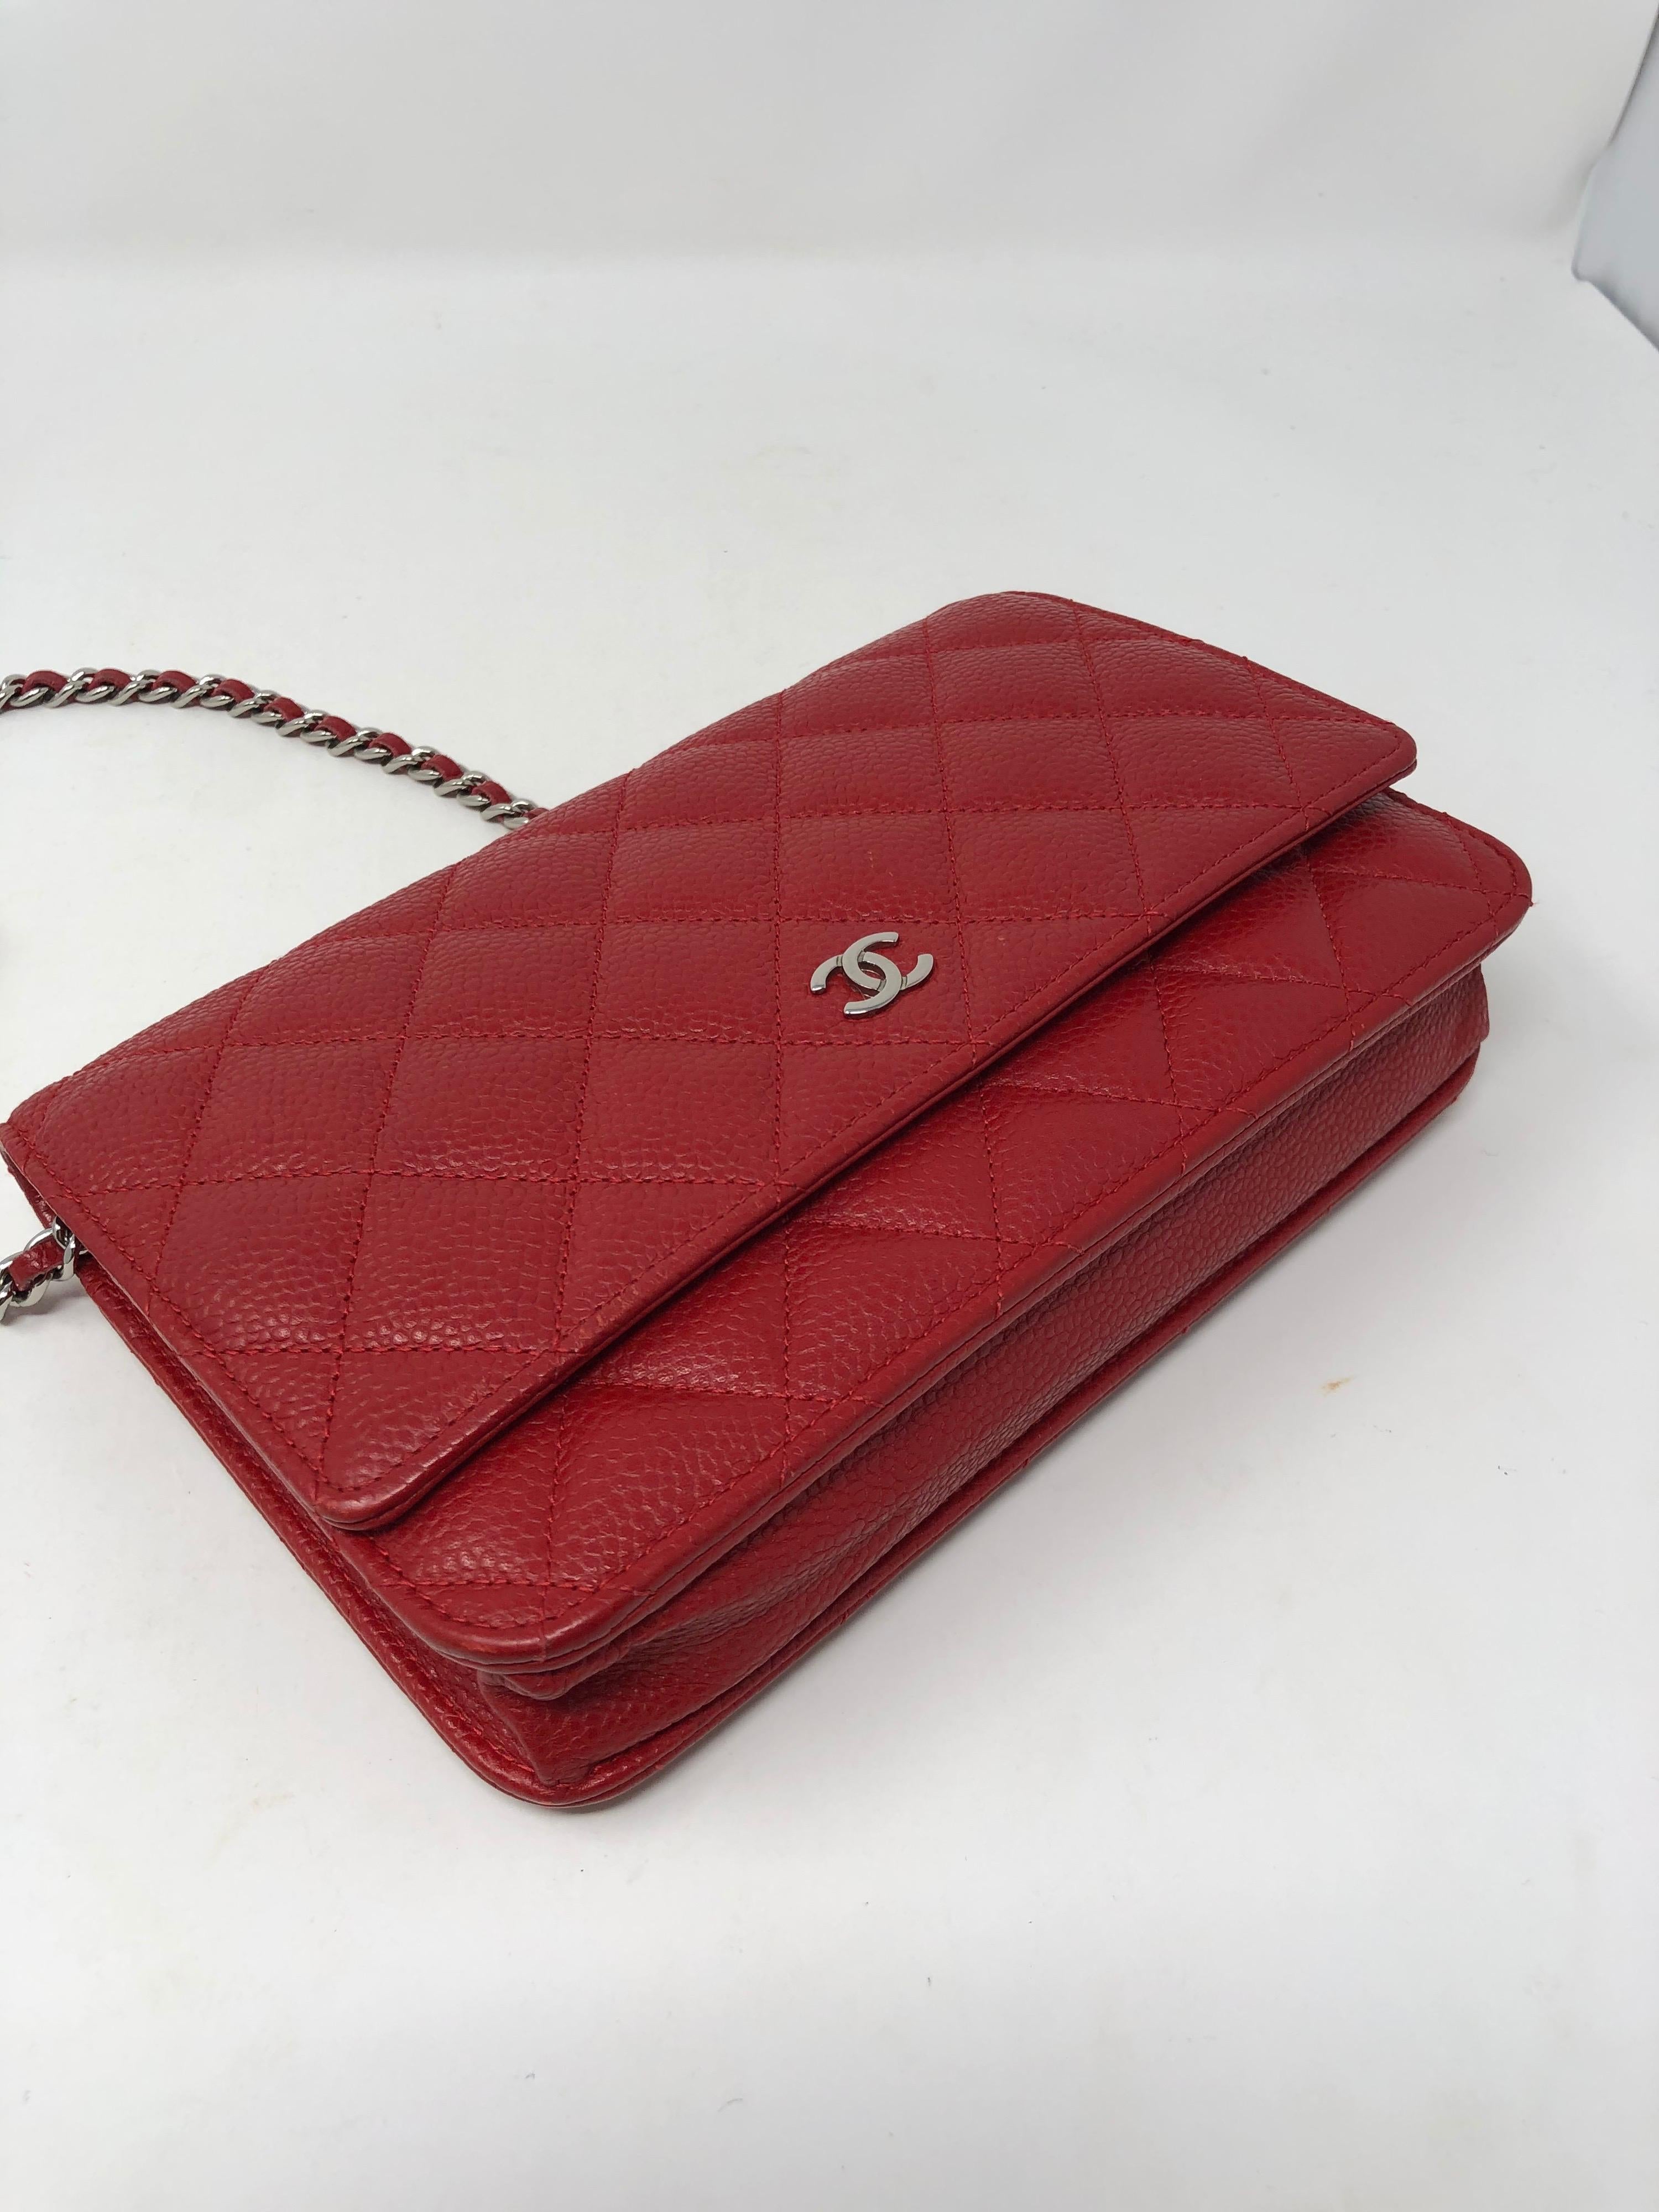 Chanel Red Caviar Wallet On A Chain Bag 5